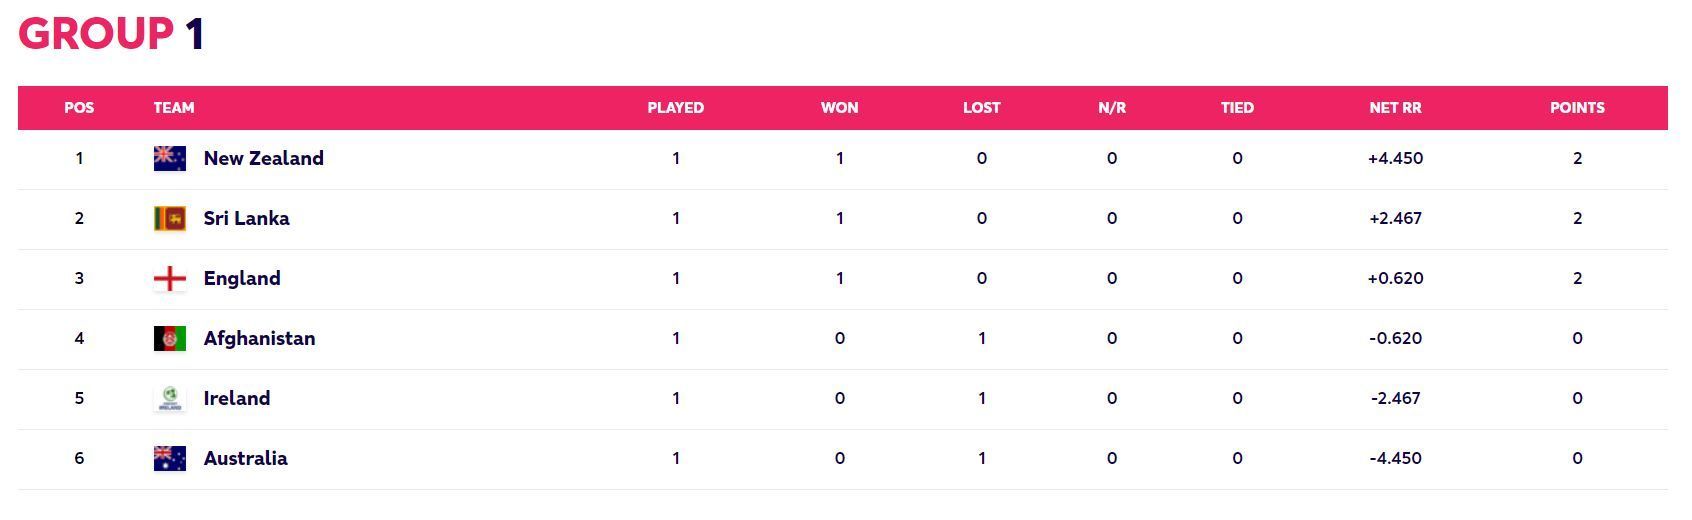 Updated Points Table after Match 15 (Image Courtesy: www.t20worldcup.com)